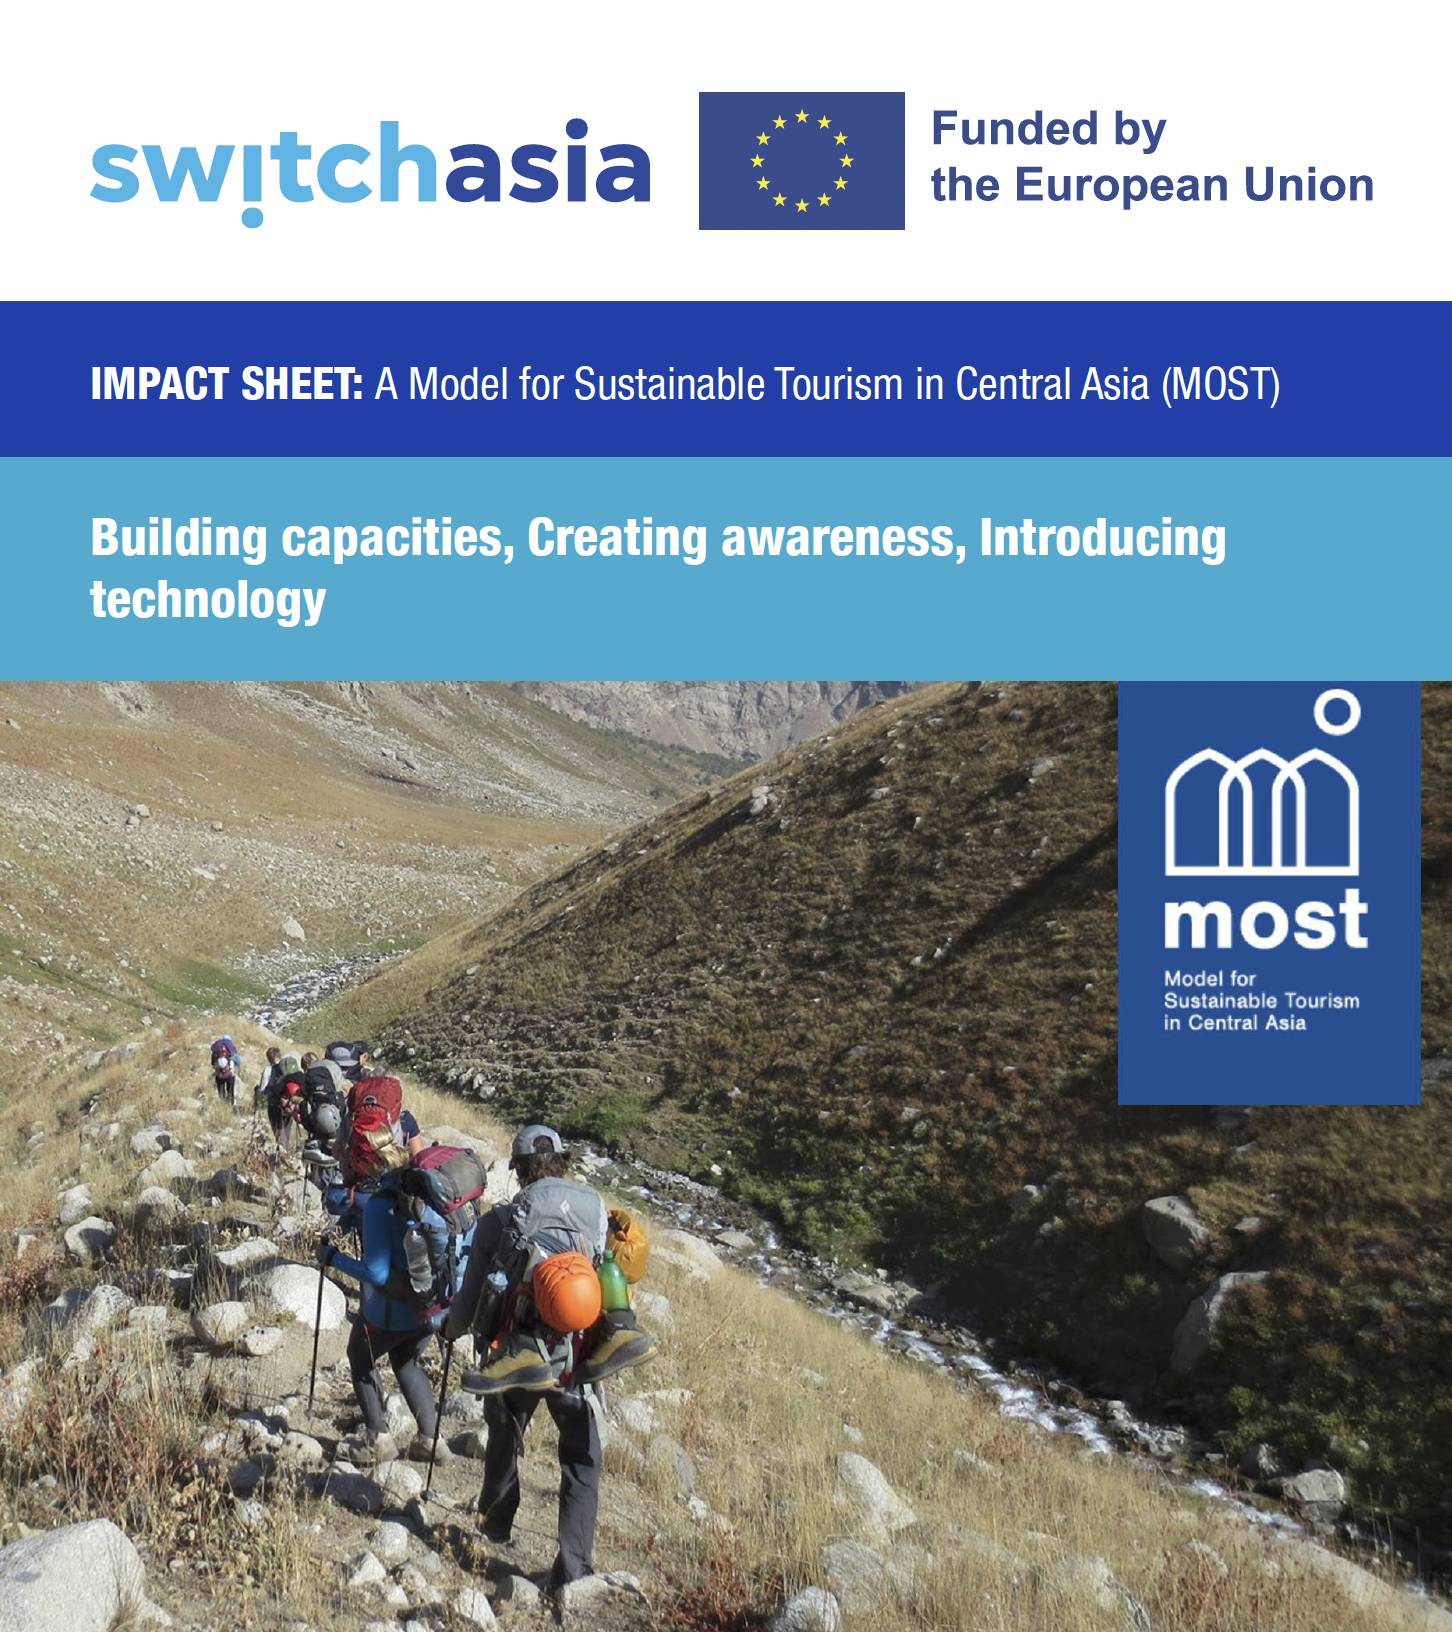 Impact Sheet: A Model for Sustainable Tourism in Central Asia (MOST)